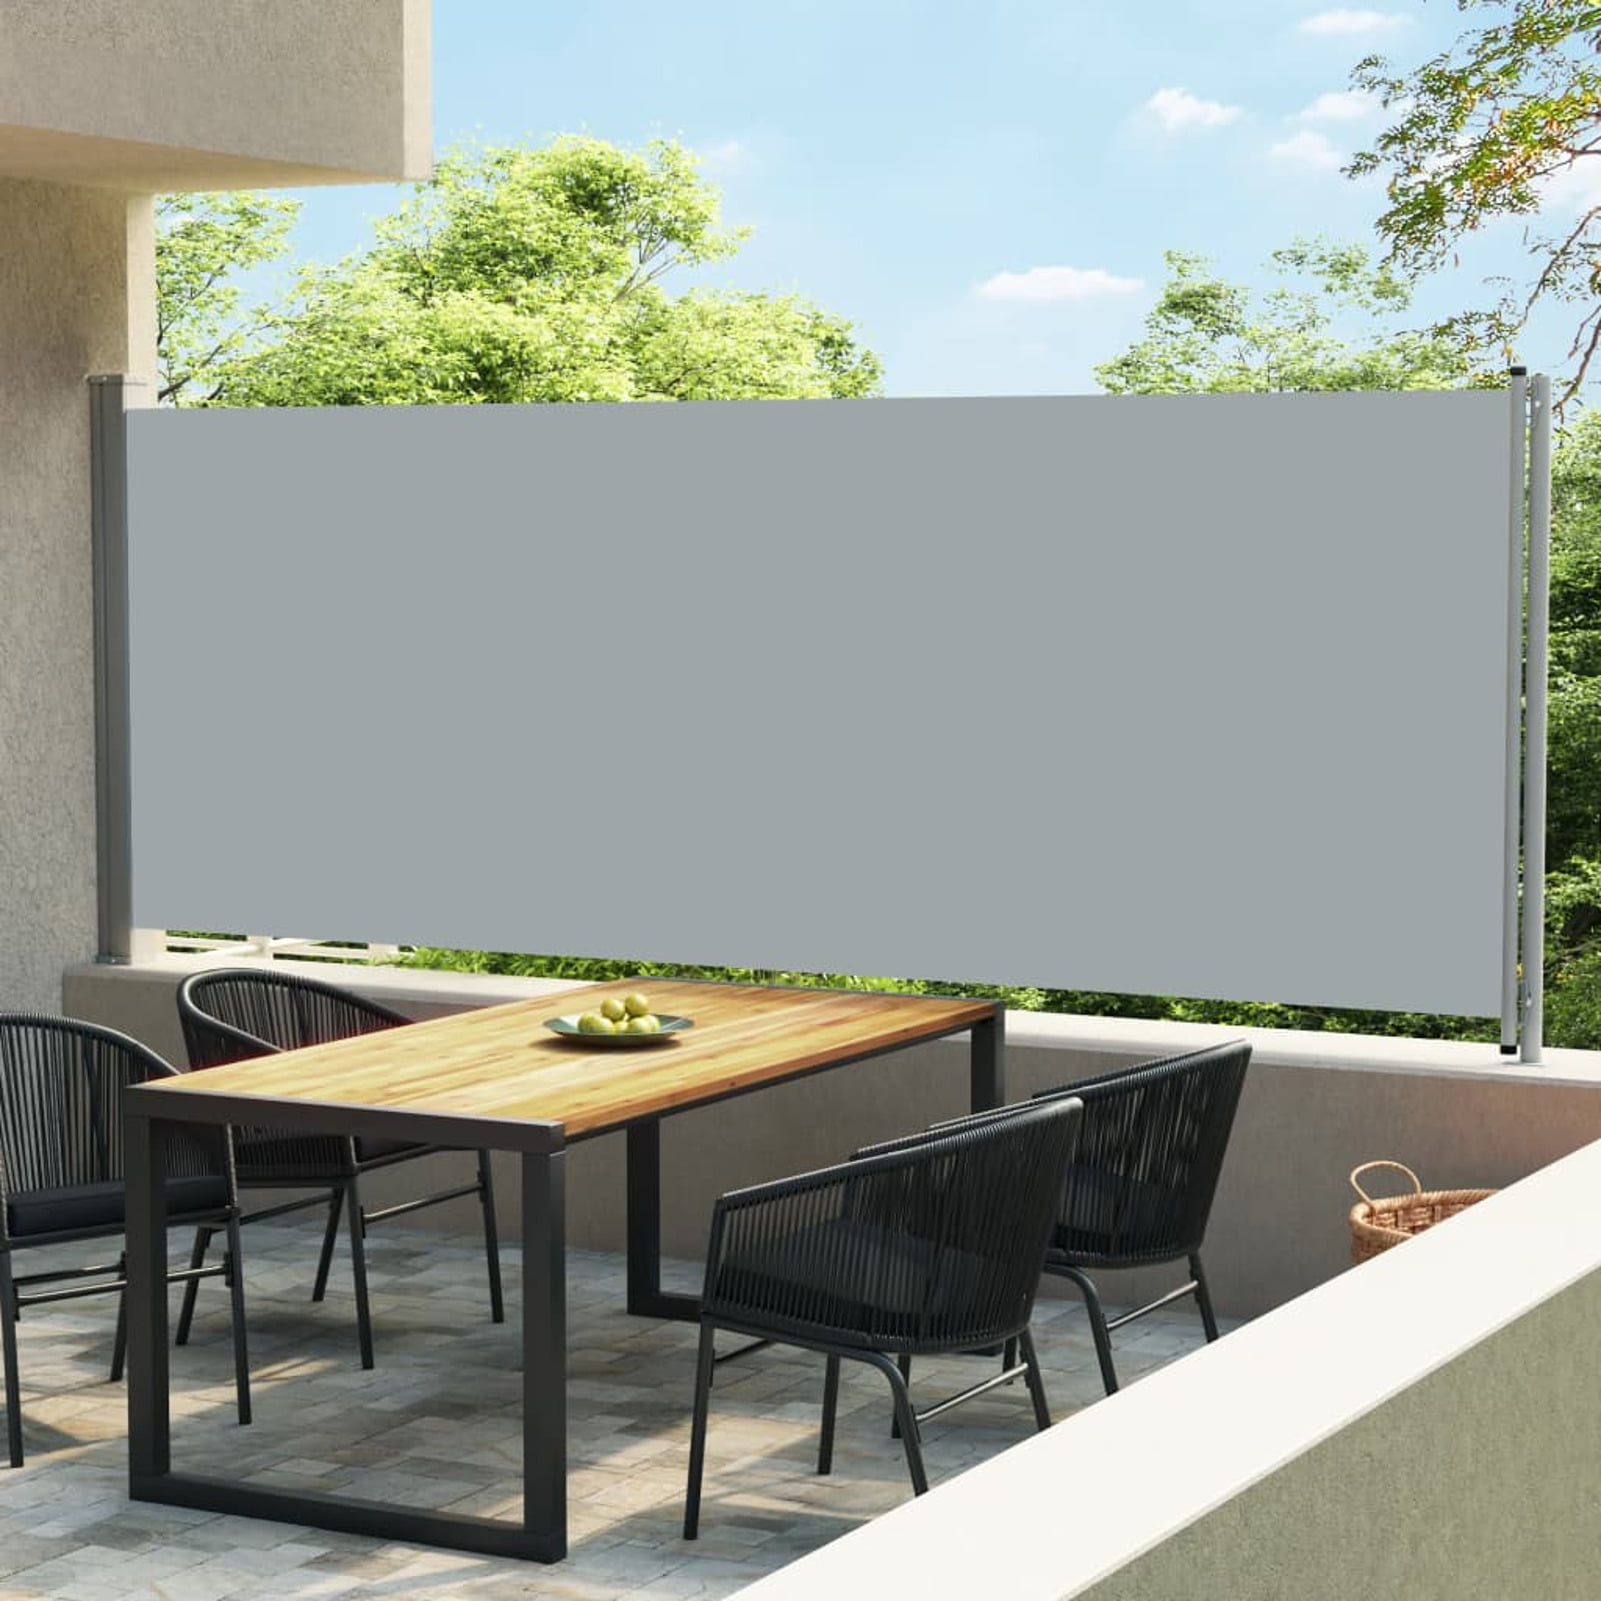 Details about   Retractable Side Awning Privacy Screen Canopy Sunshade Home Garden Yard Patio 